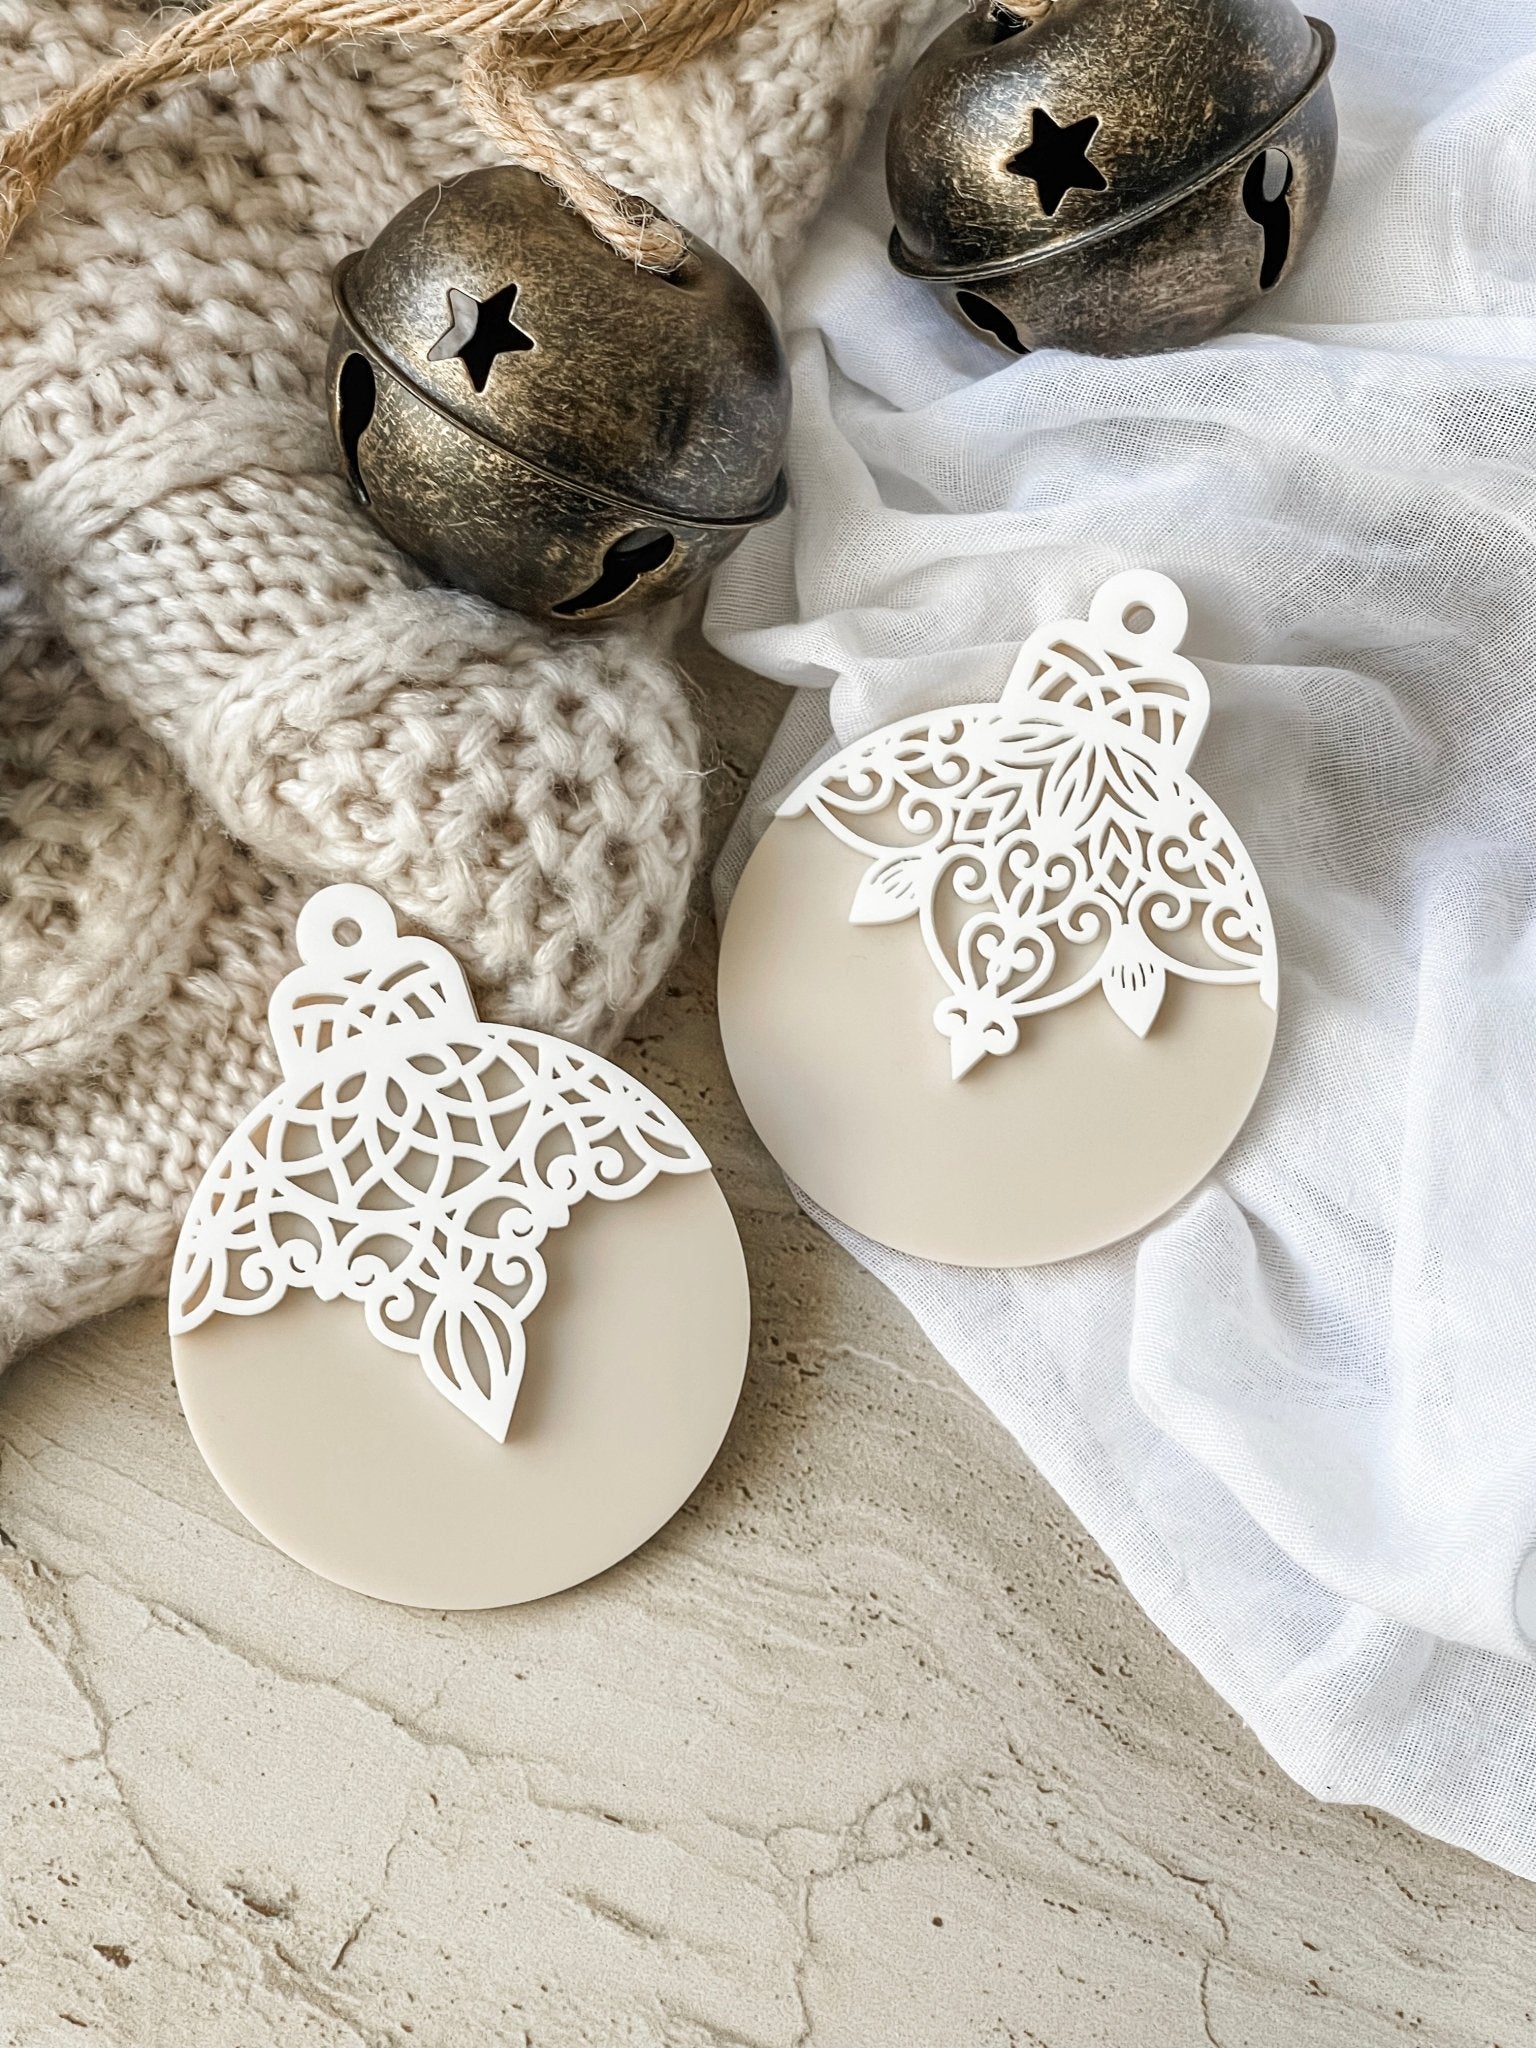 Layered Lace Look Ornament - Acrylic Base - The Humble Gift Co.